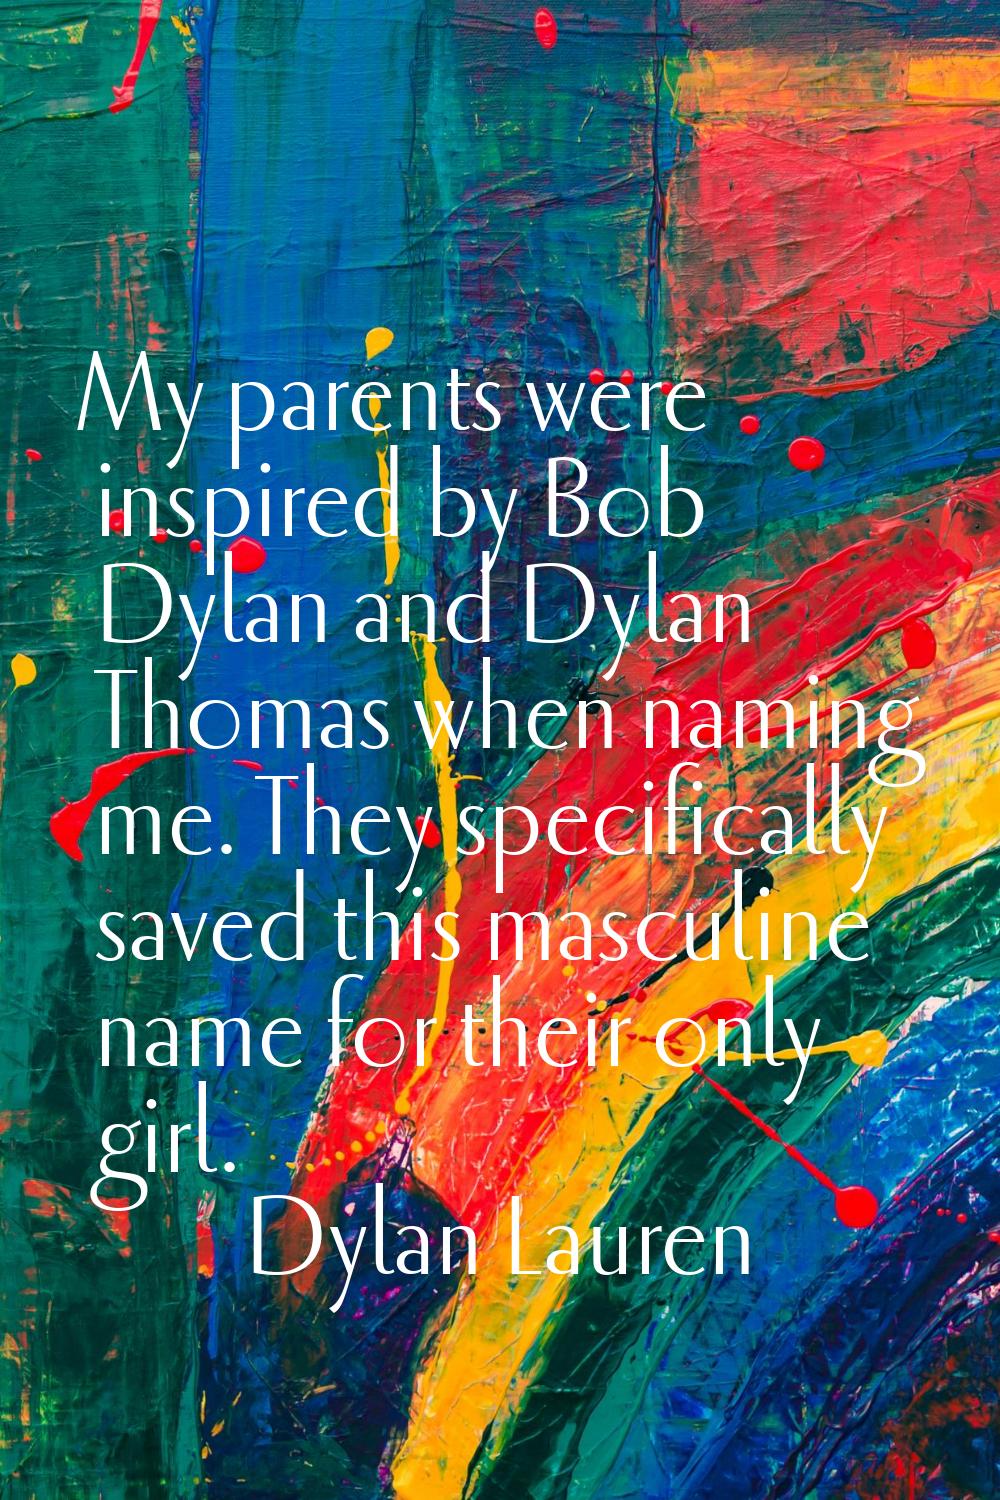 My parents were inspired by Bob Dylan and Dylan Thomas when naming me. They specifically saved this